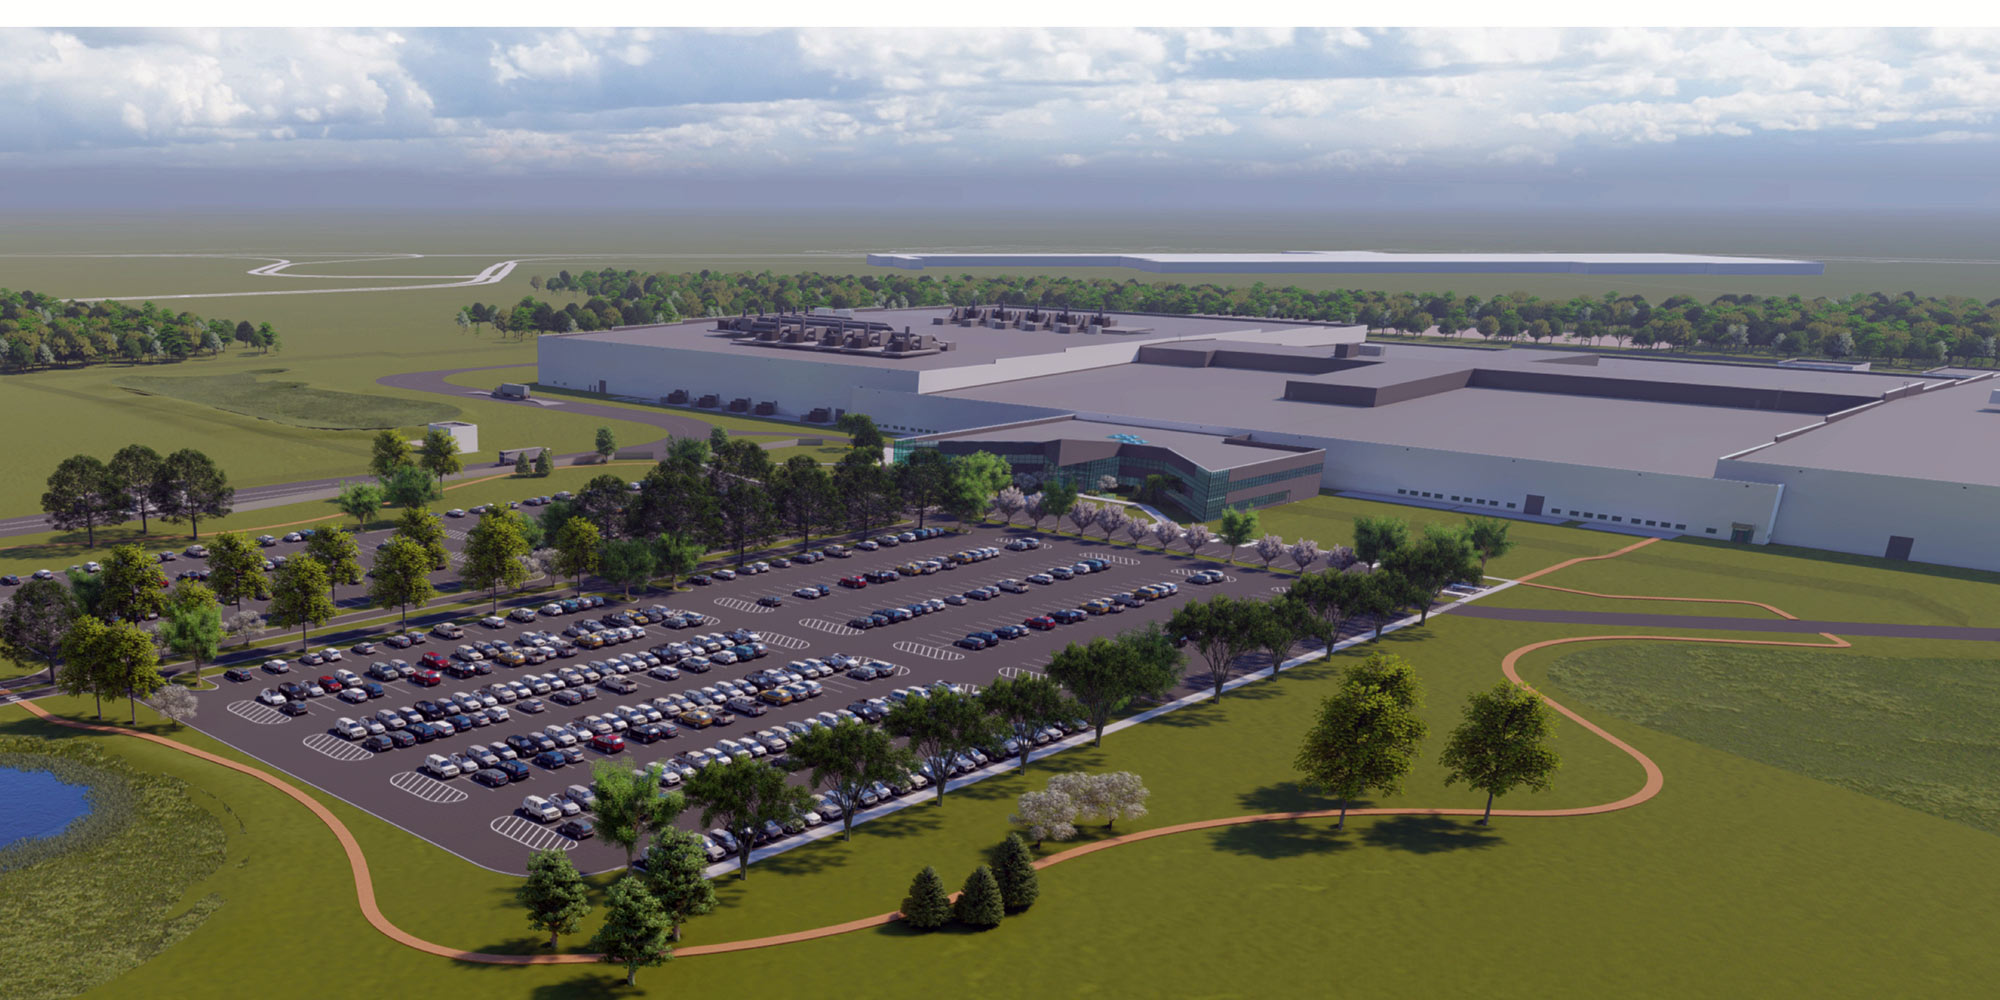 Rendering of GM-LG Chem facility in Lordstown, Ohio